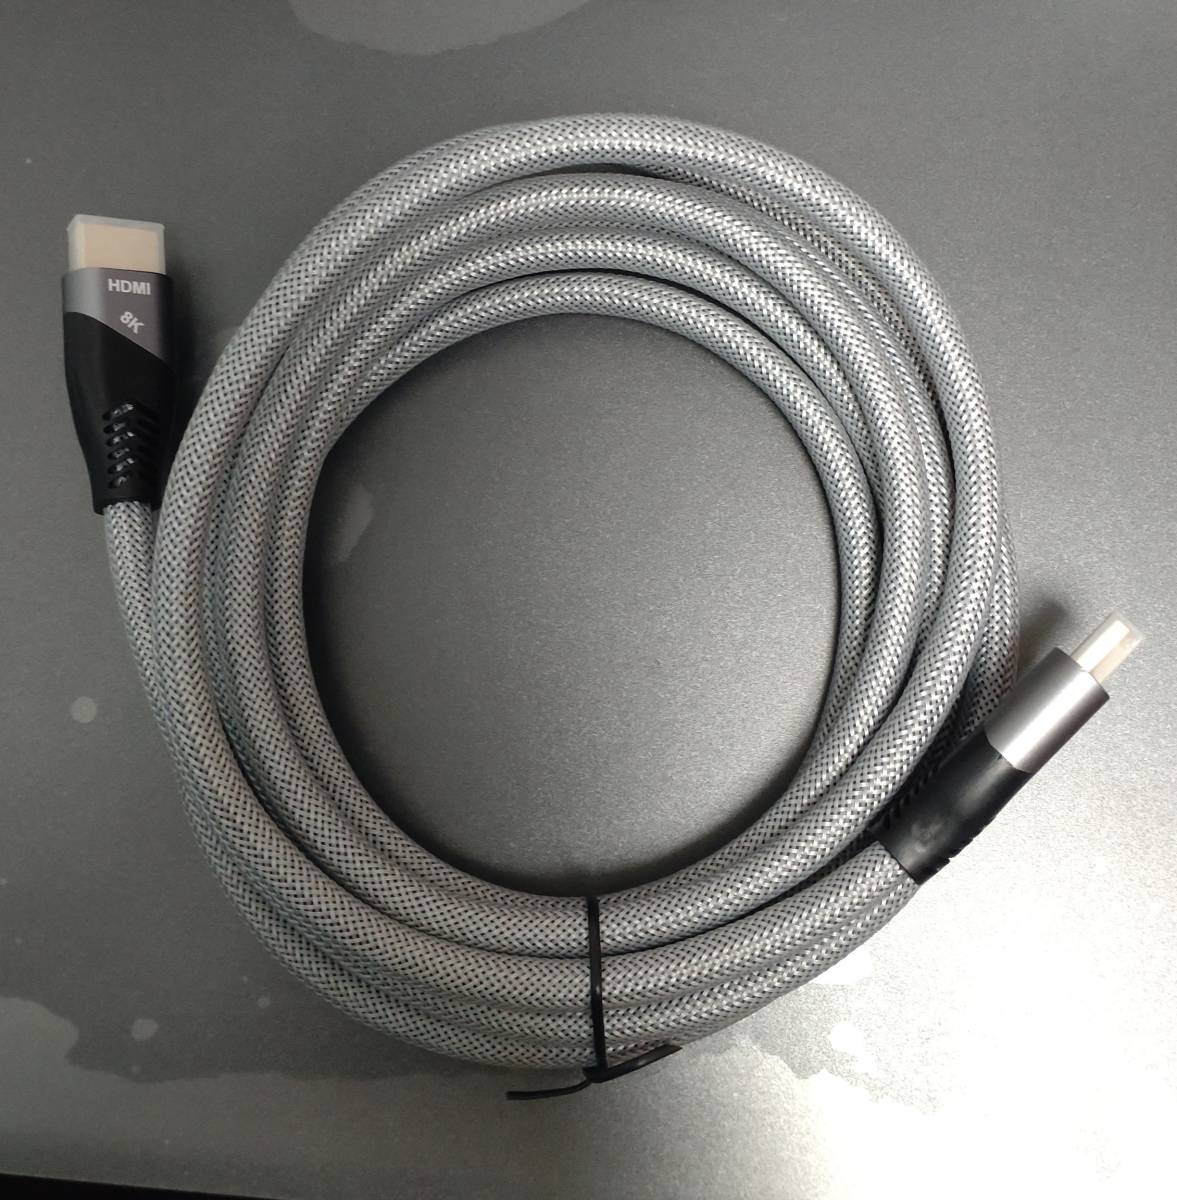  unused breaking the seal goods free shipping QING CAOQING 8K HDMI cable 3M ②